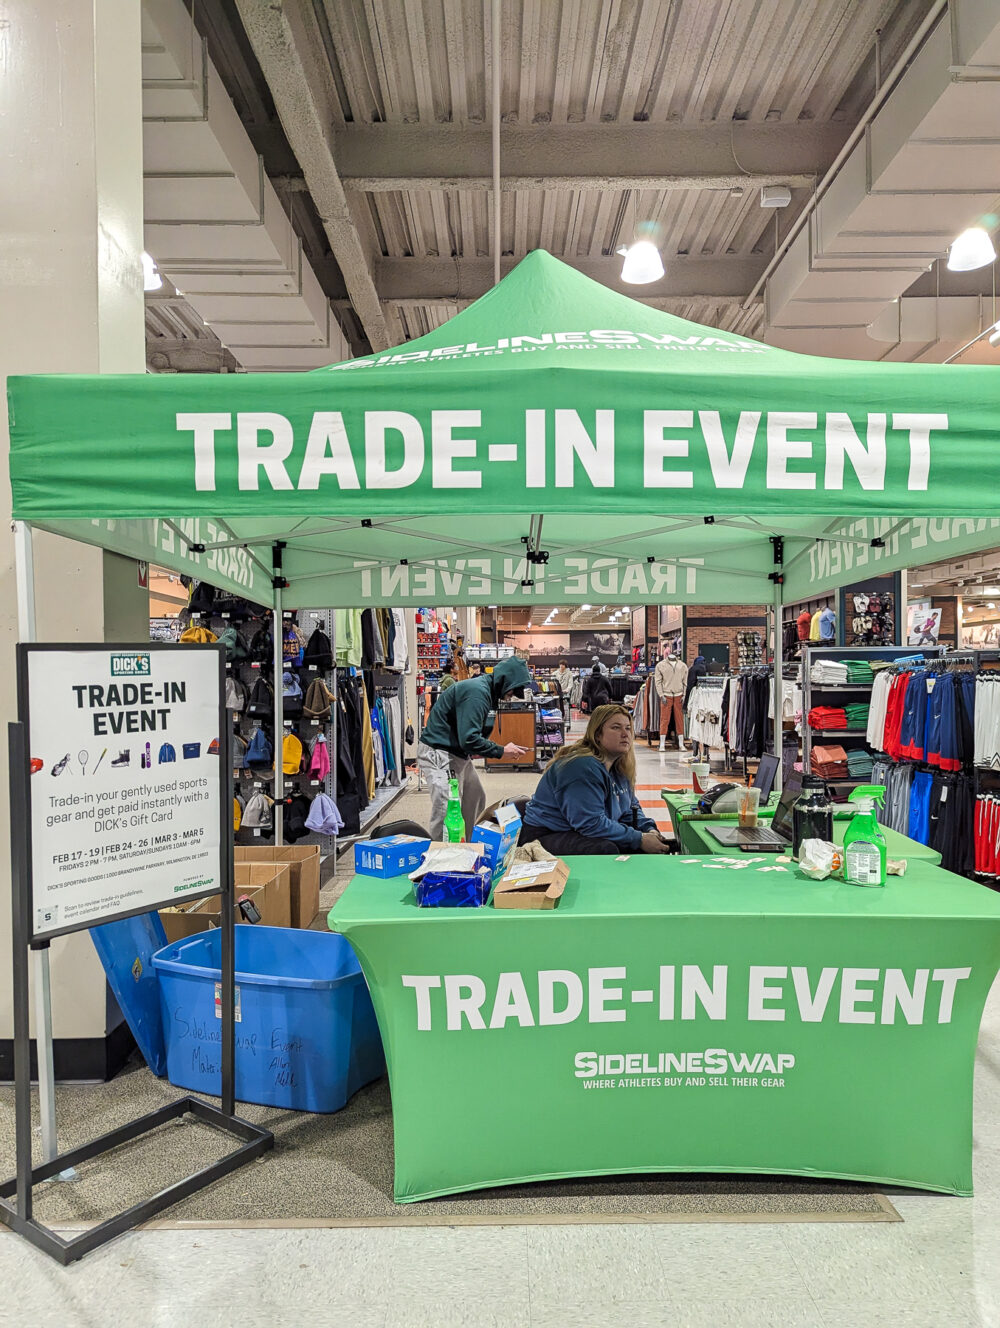 Table for Sideline Swap Trade-in Event for Sports Equipment